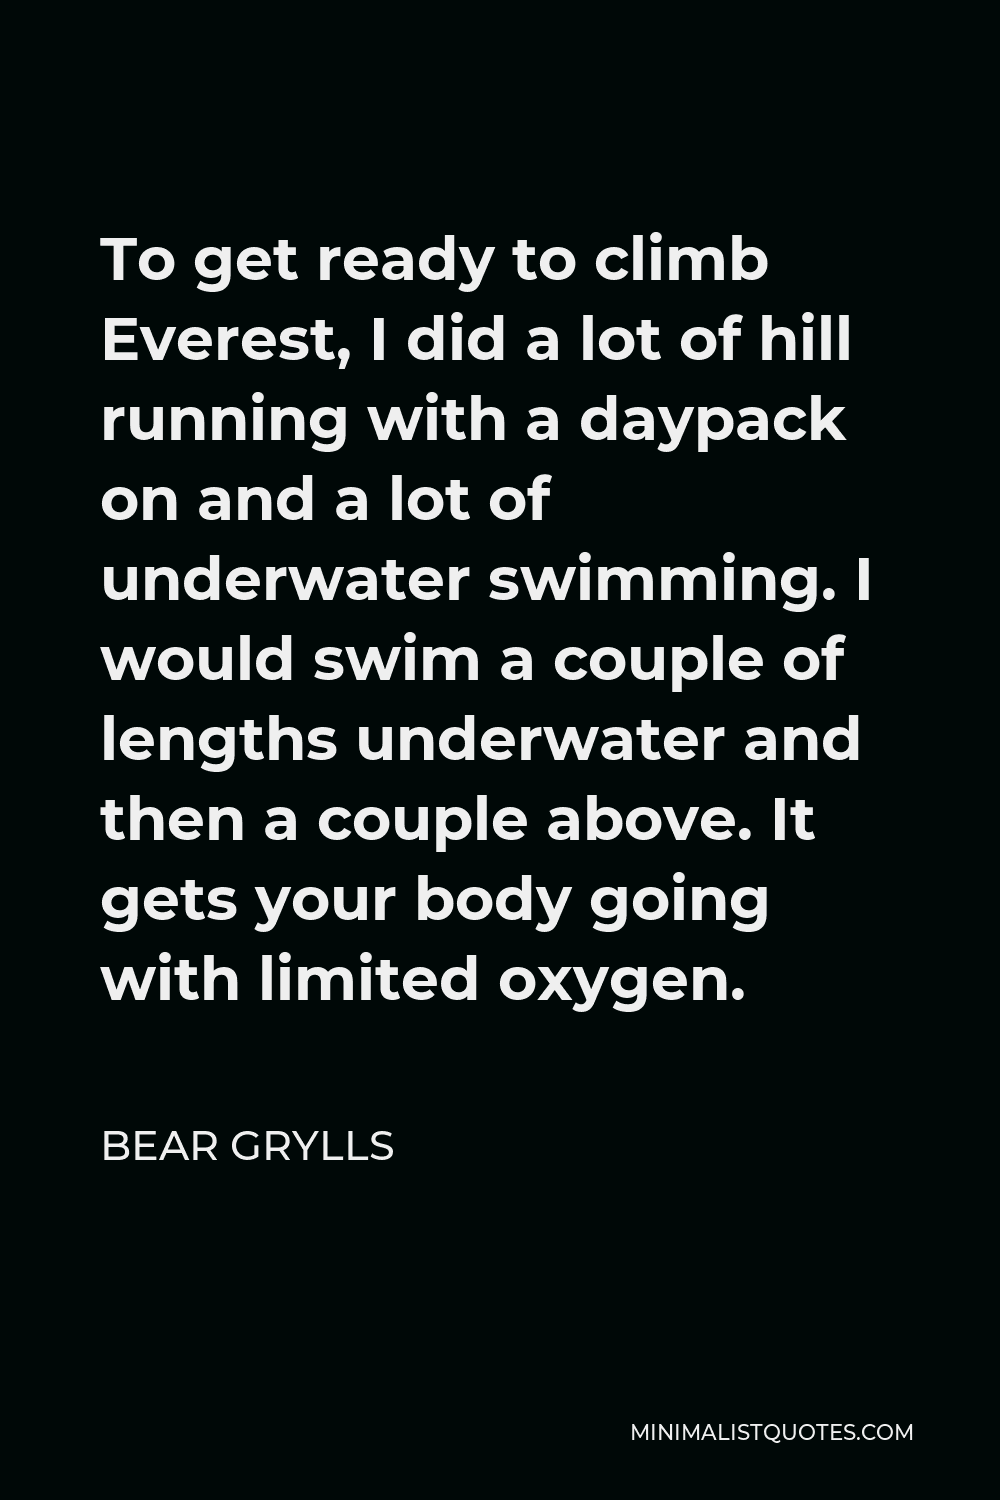 Bear Grylls Quote - To get ready to climb Everest, I did a lot of hill running with a daypack on and a lot of underwater swimming. I would swim a couple of lengths underwater and then a couple above. It gets your body going with limited oxygen.